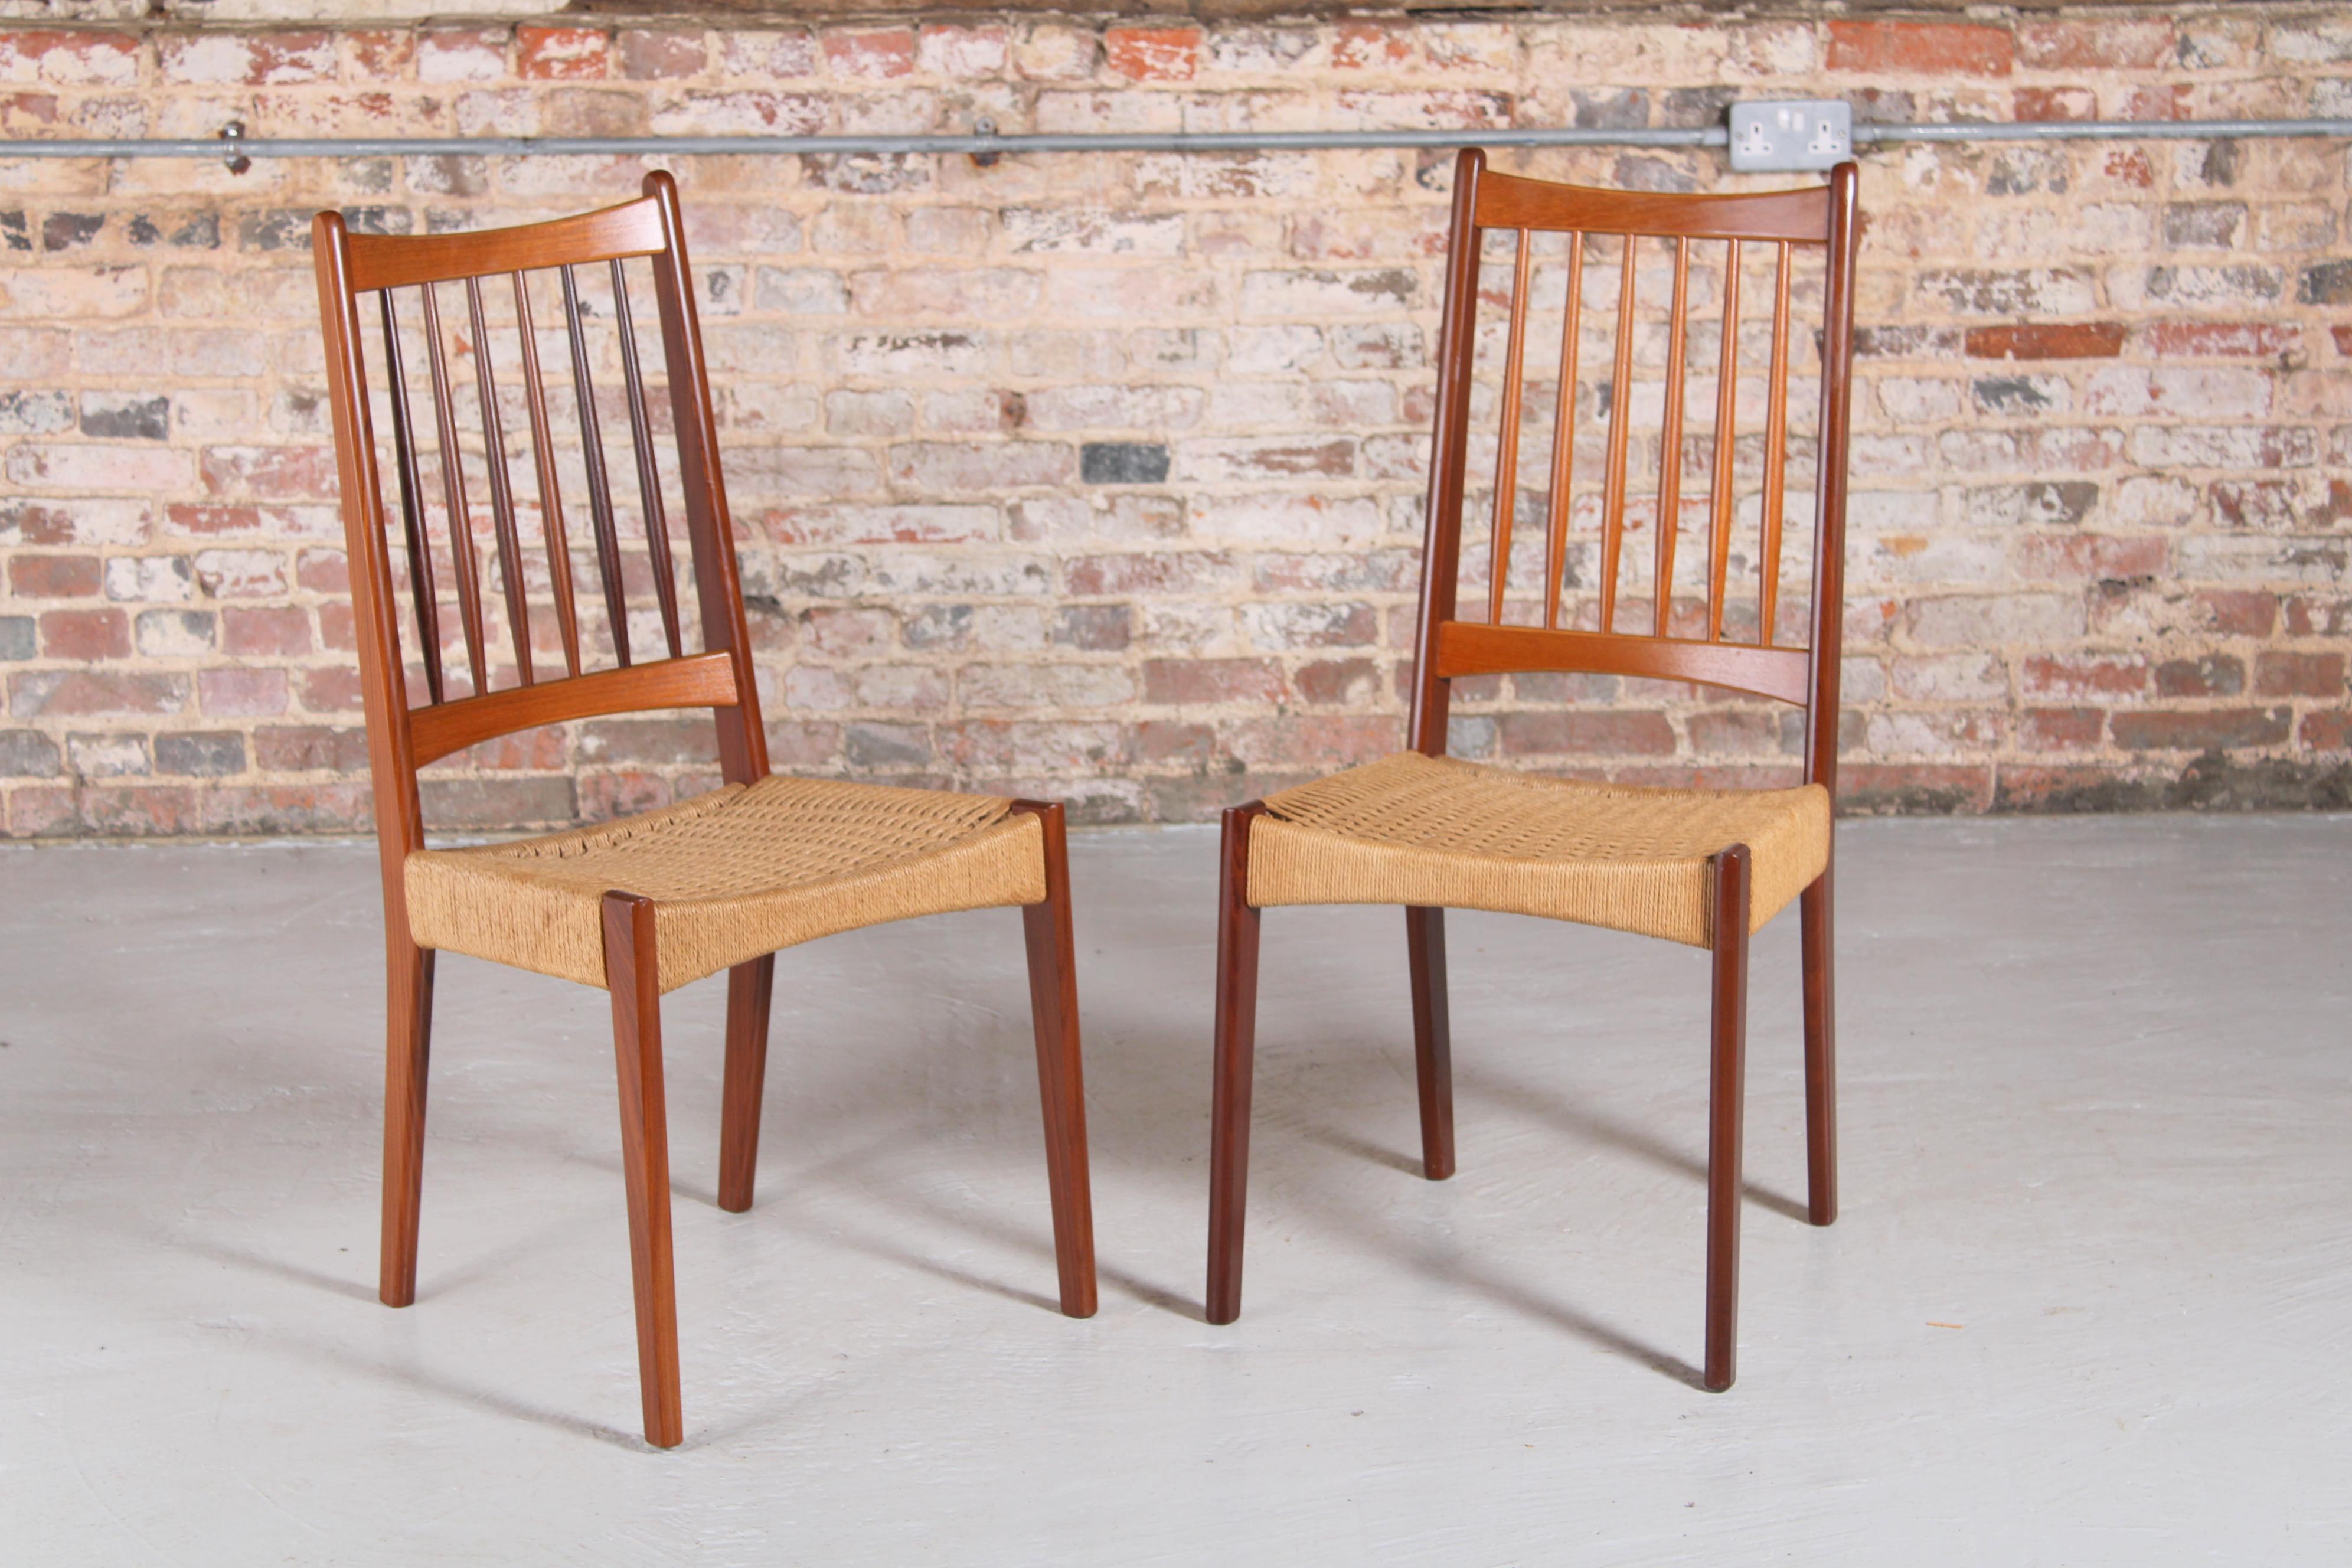 Mid-Century Modern Set of 6 Danish Dining Chairs with papercord seats by Arne Hovmand-Olsen for Mog